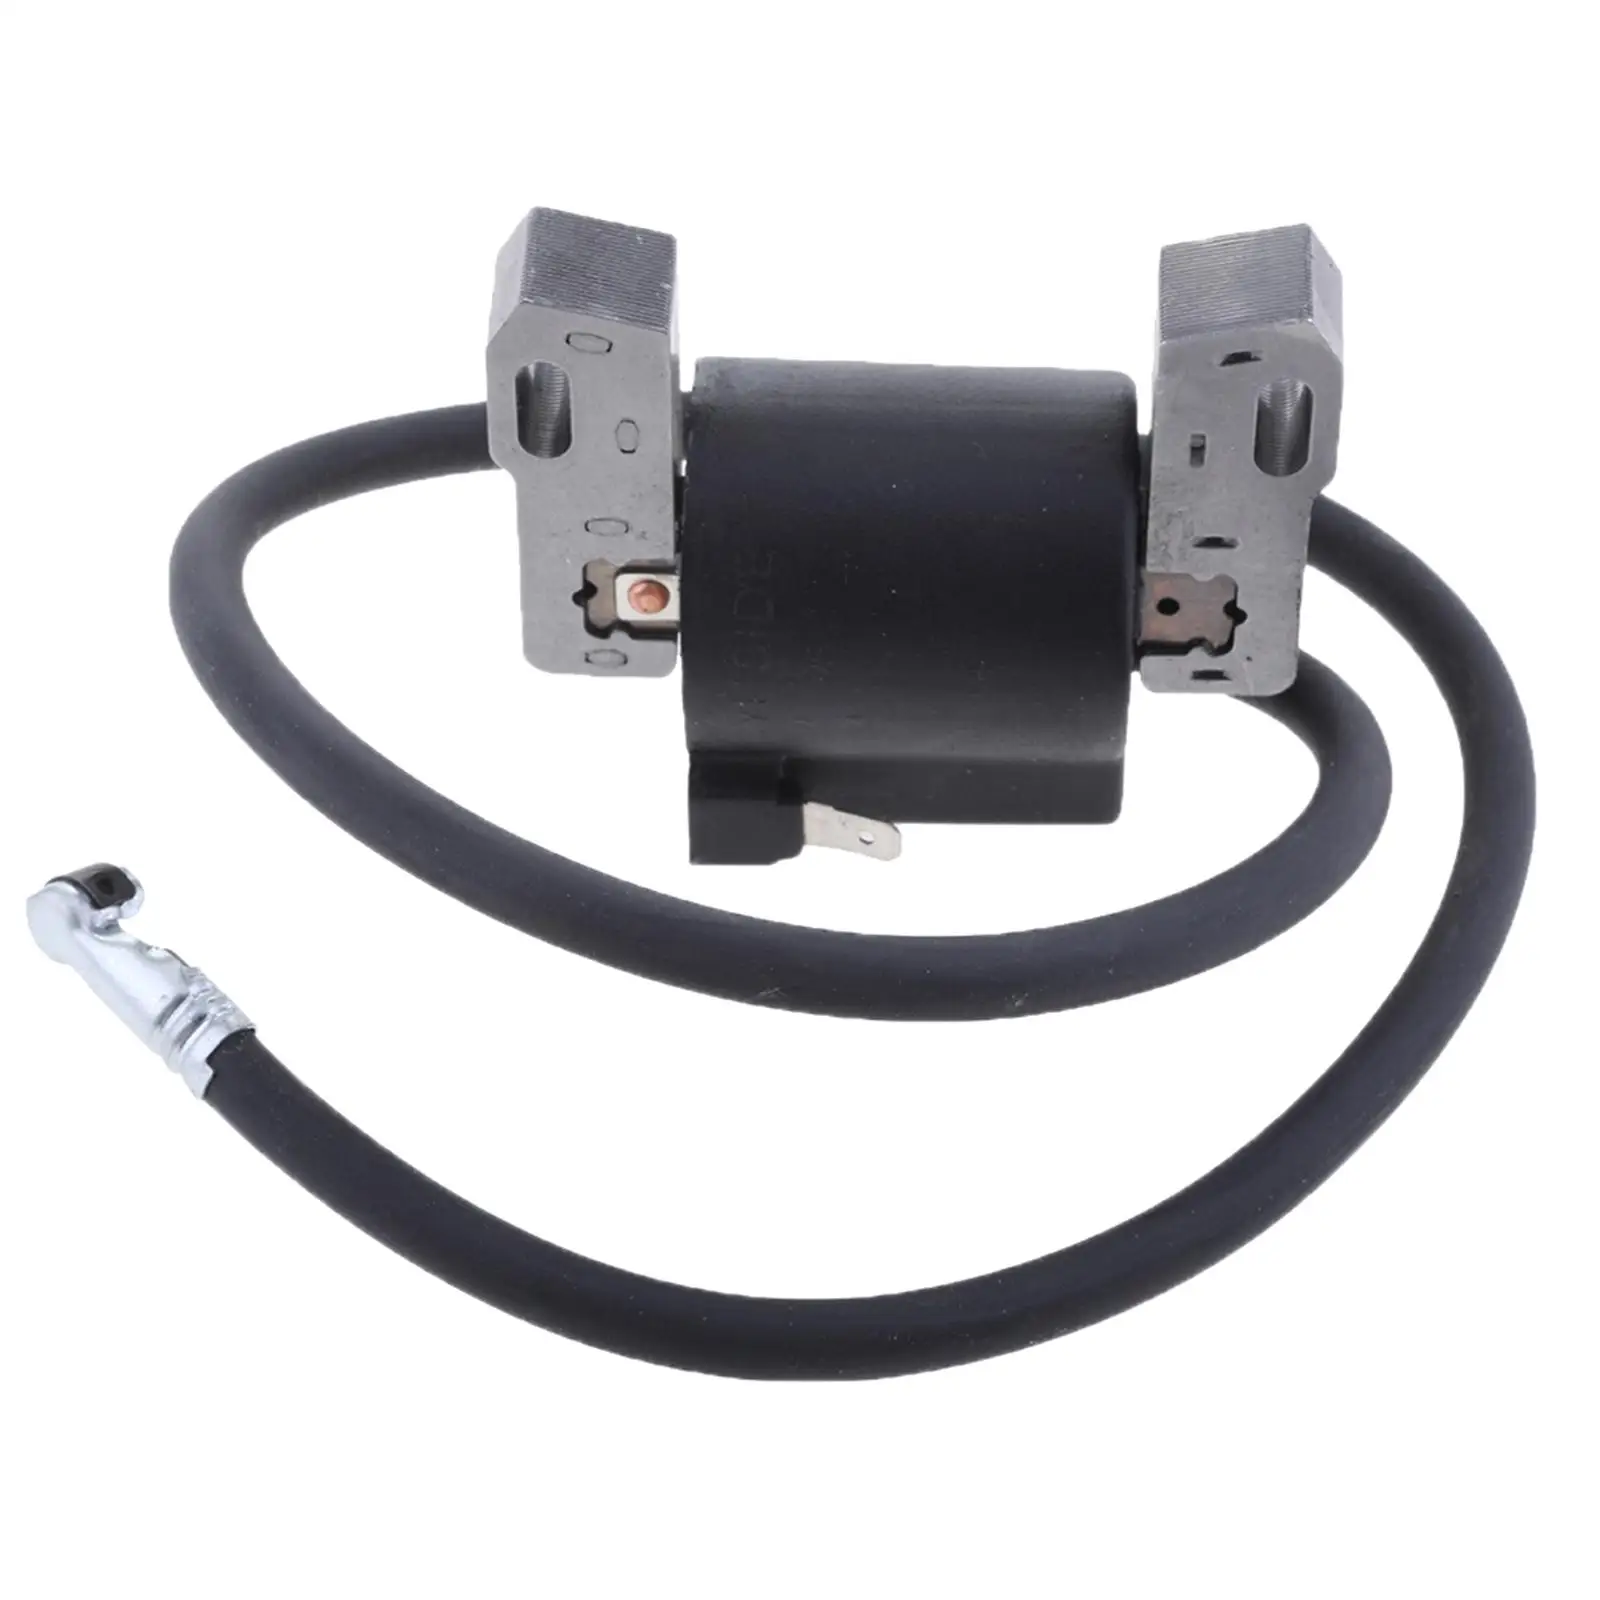 

Ignition Coil for Electrolux 395326 395492 398265 398811 Armature Magneto Electronic Ignition Coil